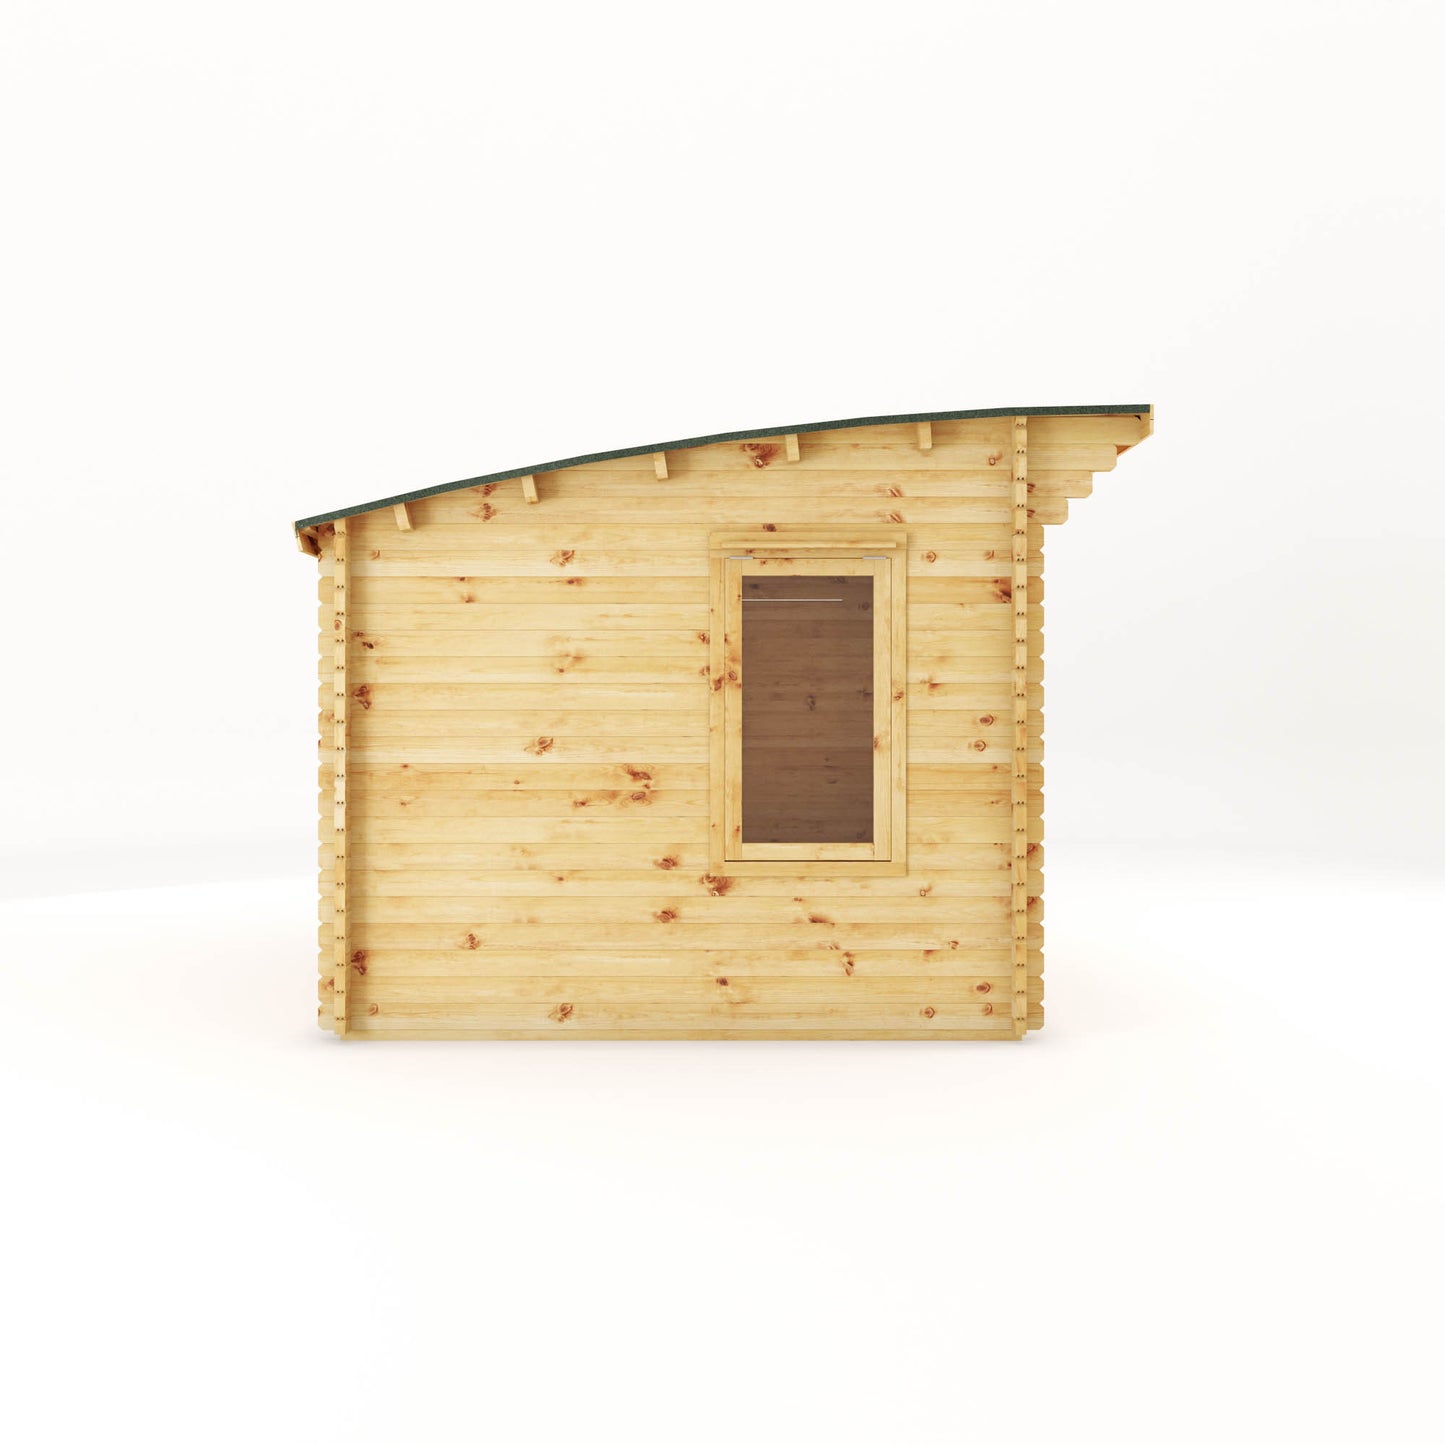 The 3m x 3m Tawny Curved Roof Log Cabin